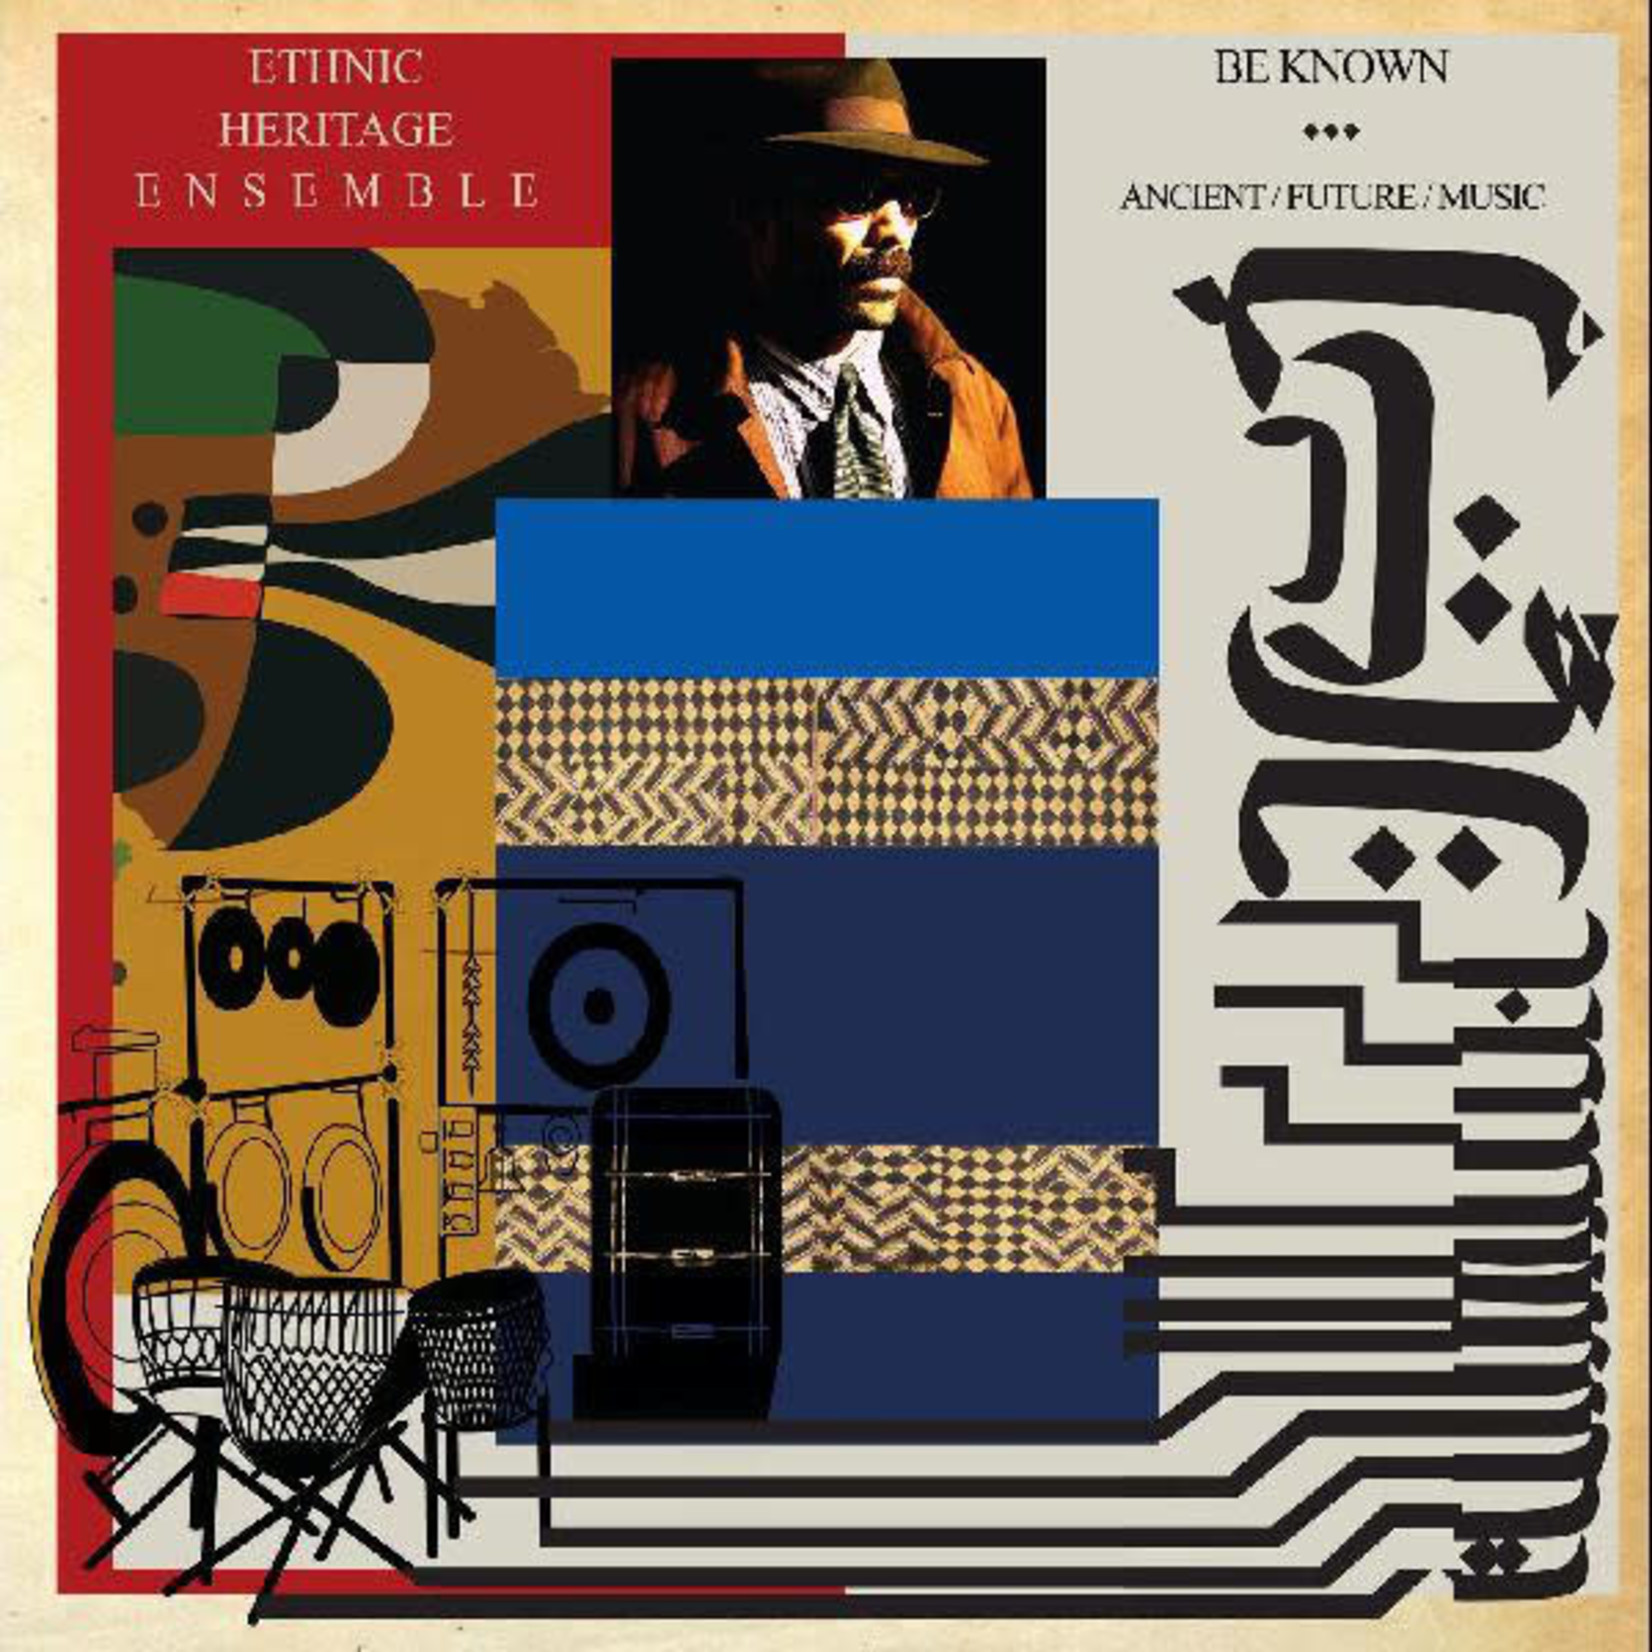 Ethnic Heritage Ensemble - Be Known: Ancient / Future / Music (2LP)